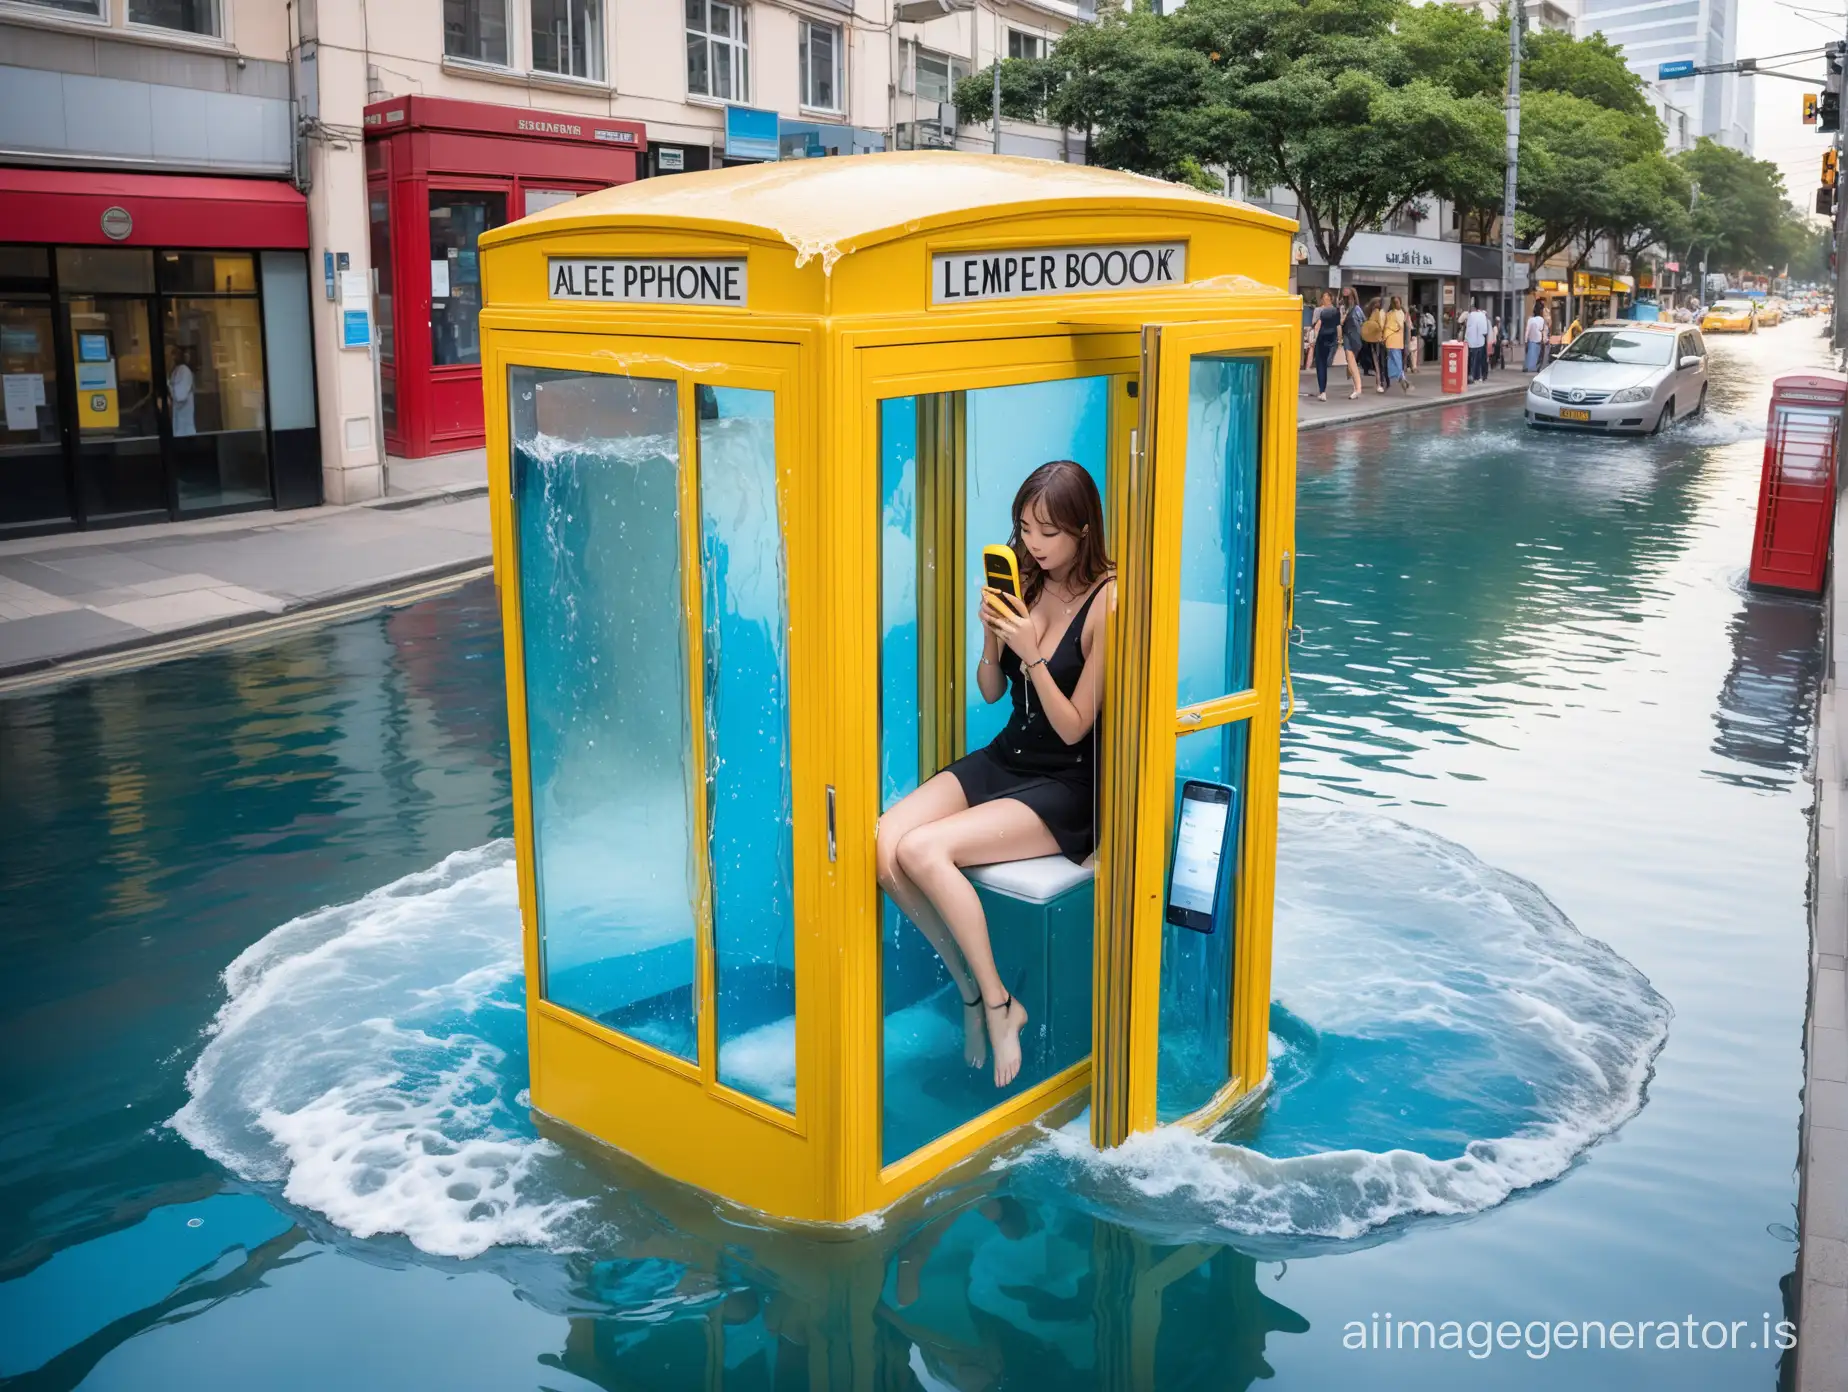 Woman-in-a-Submerged-Phone-Booth-on-a-Modern-Street-Corner